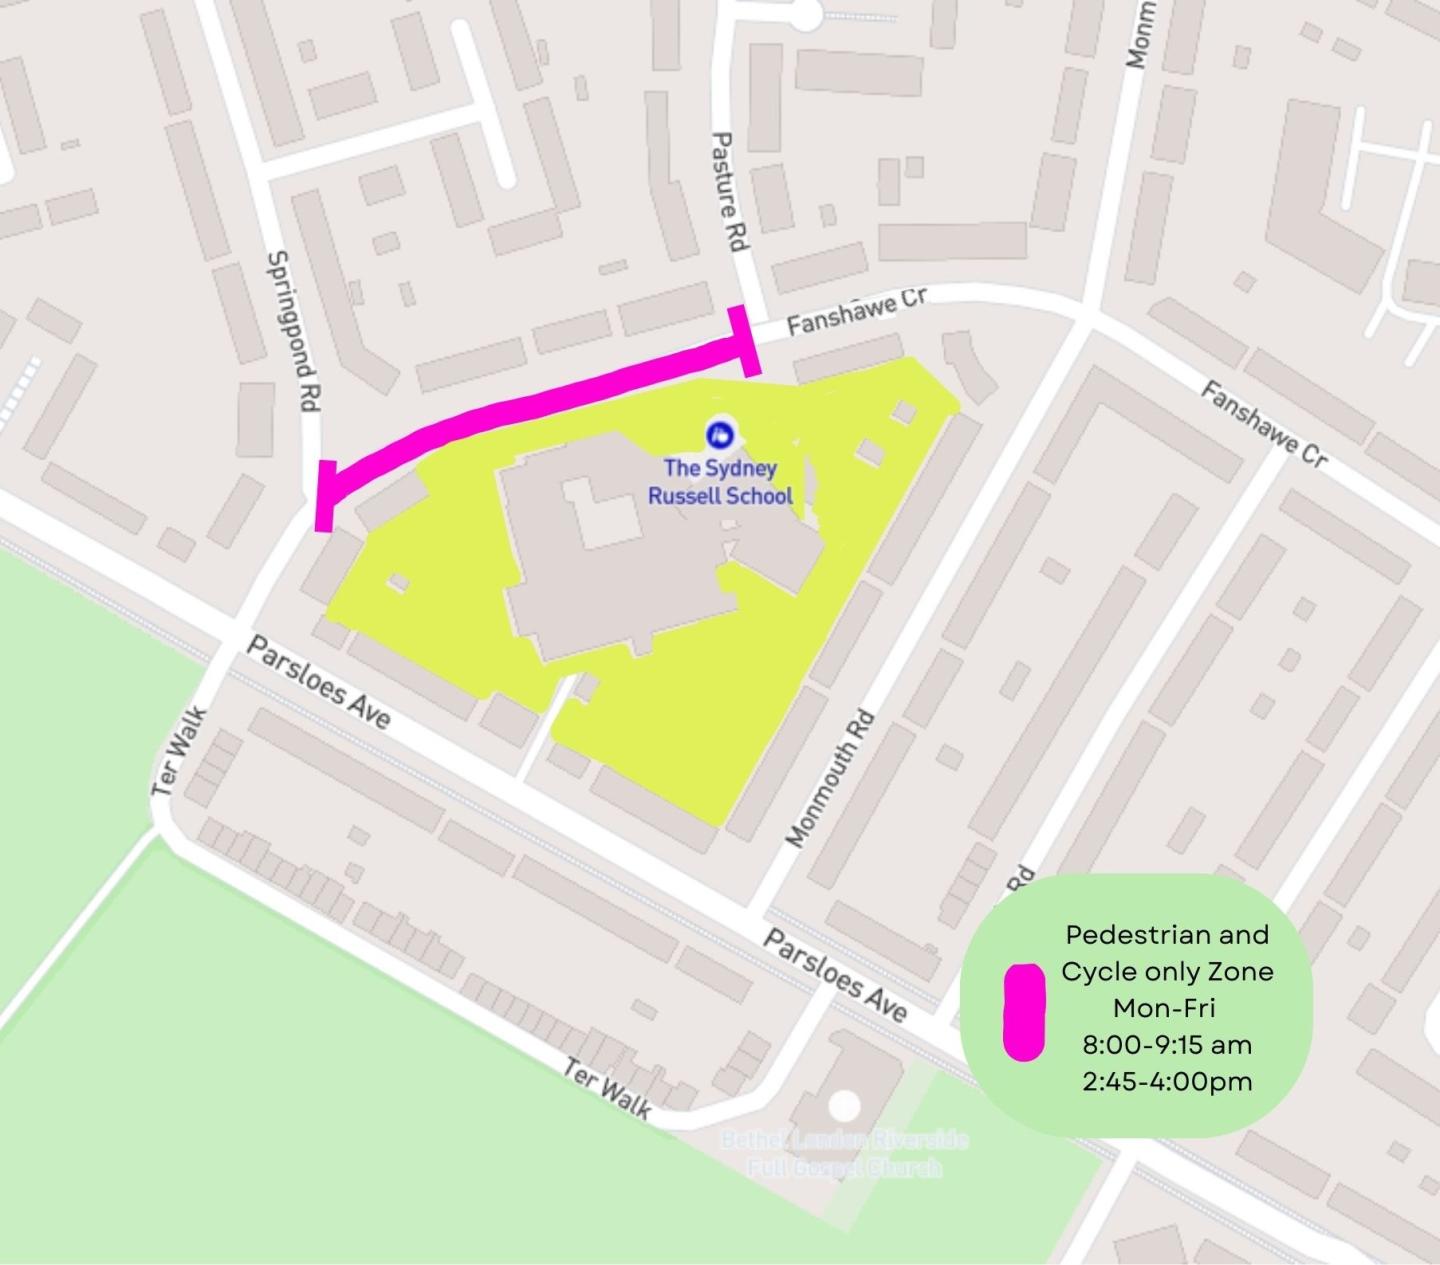 A map showing the location of the School Street for The Sydney Russell School